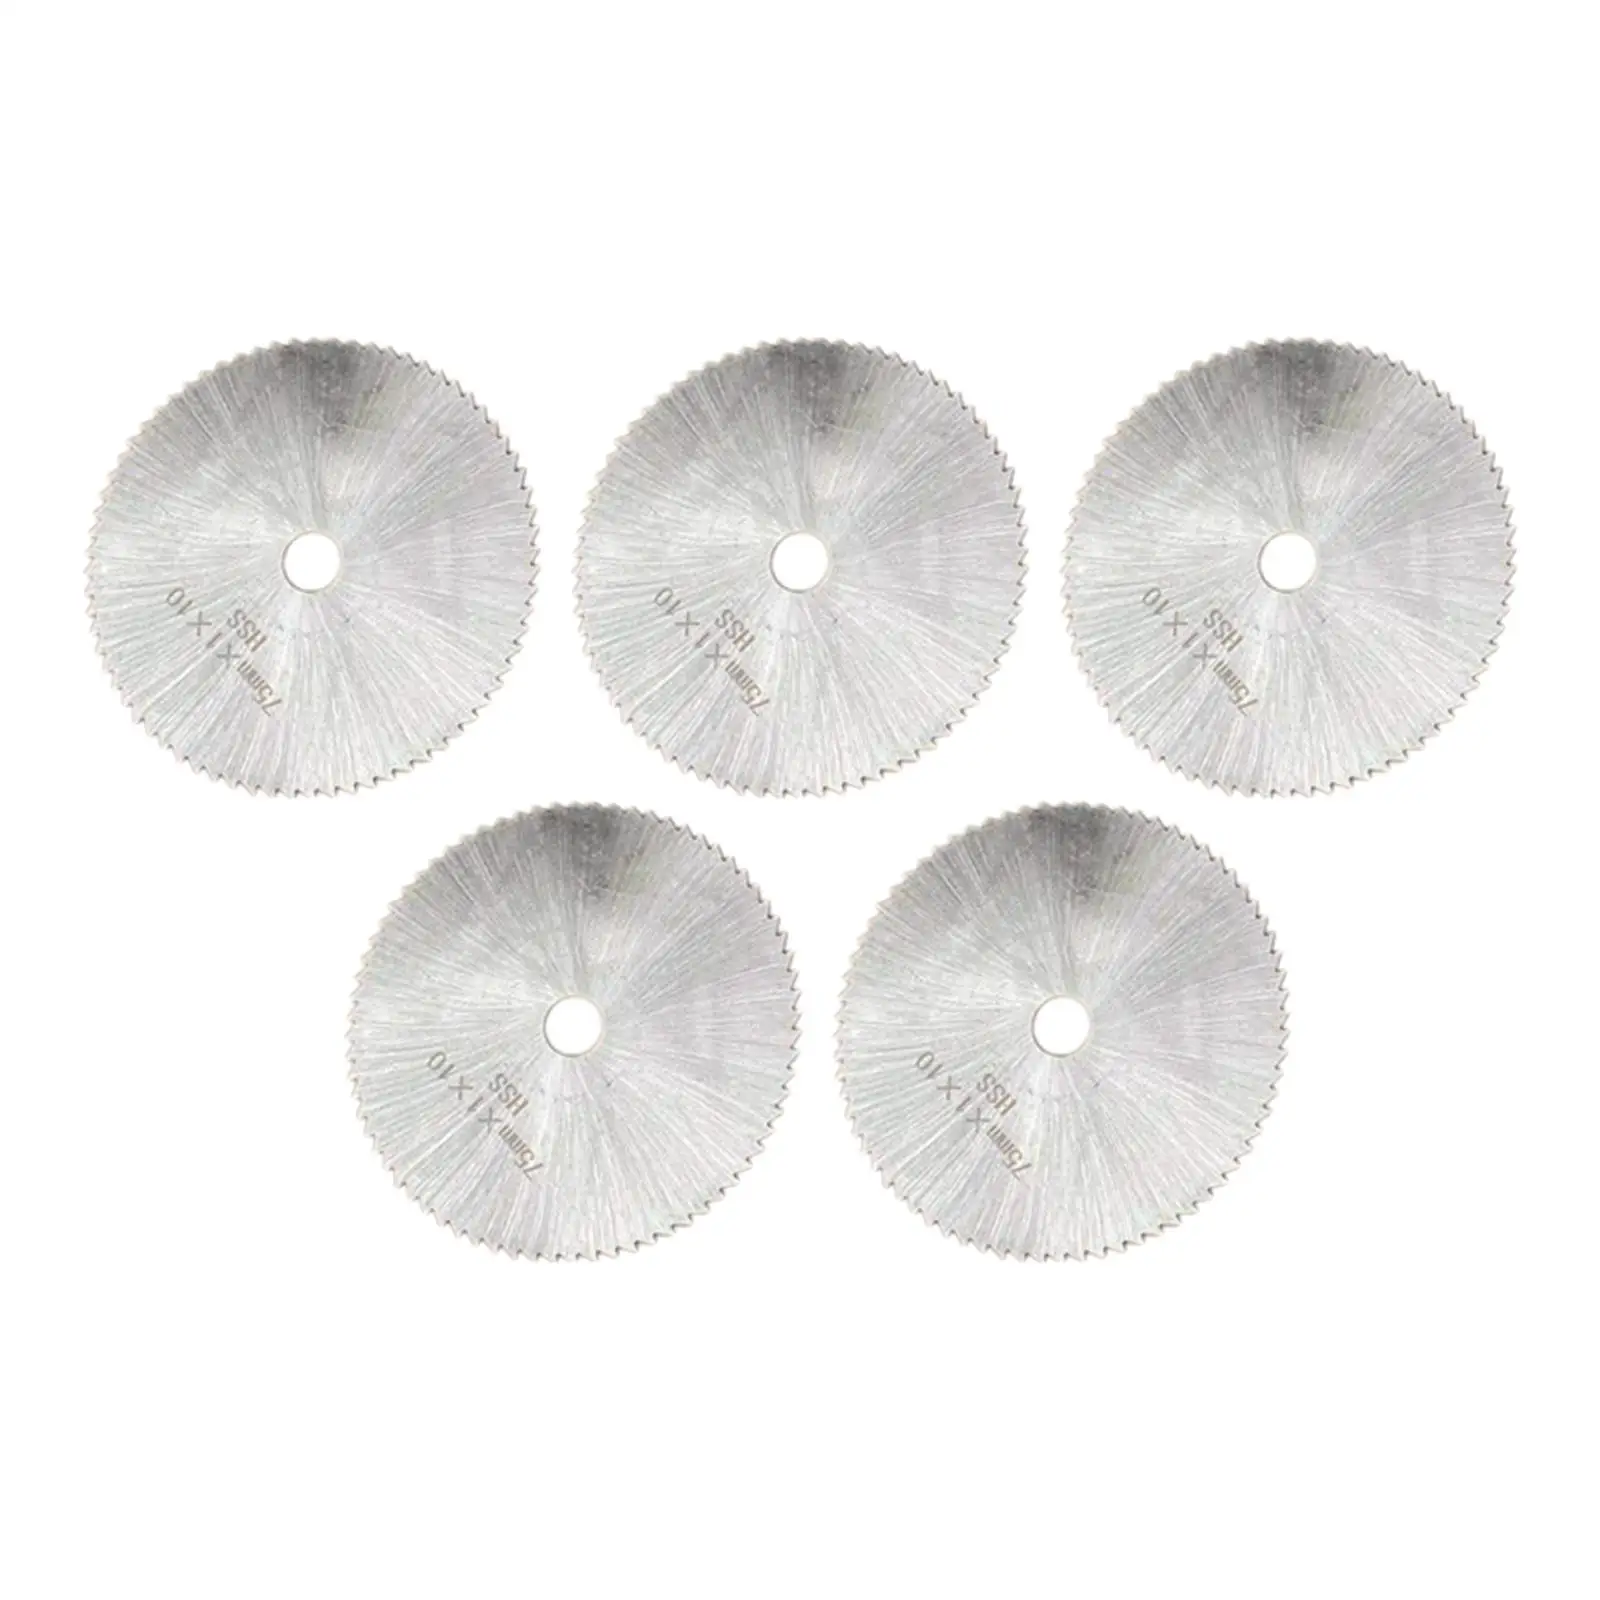 5Pcs Cutting Wheels Multi Functional Tile Tool for Attachment Wood Granite